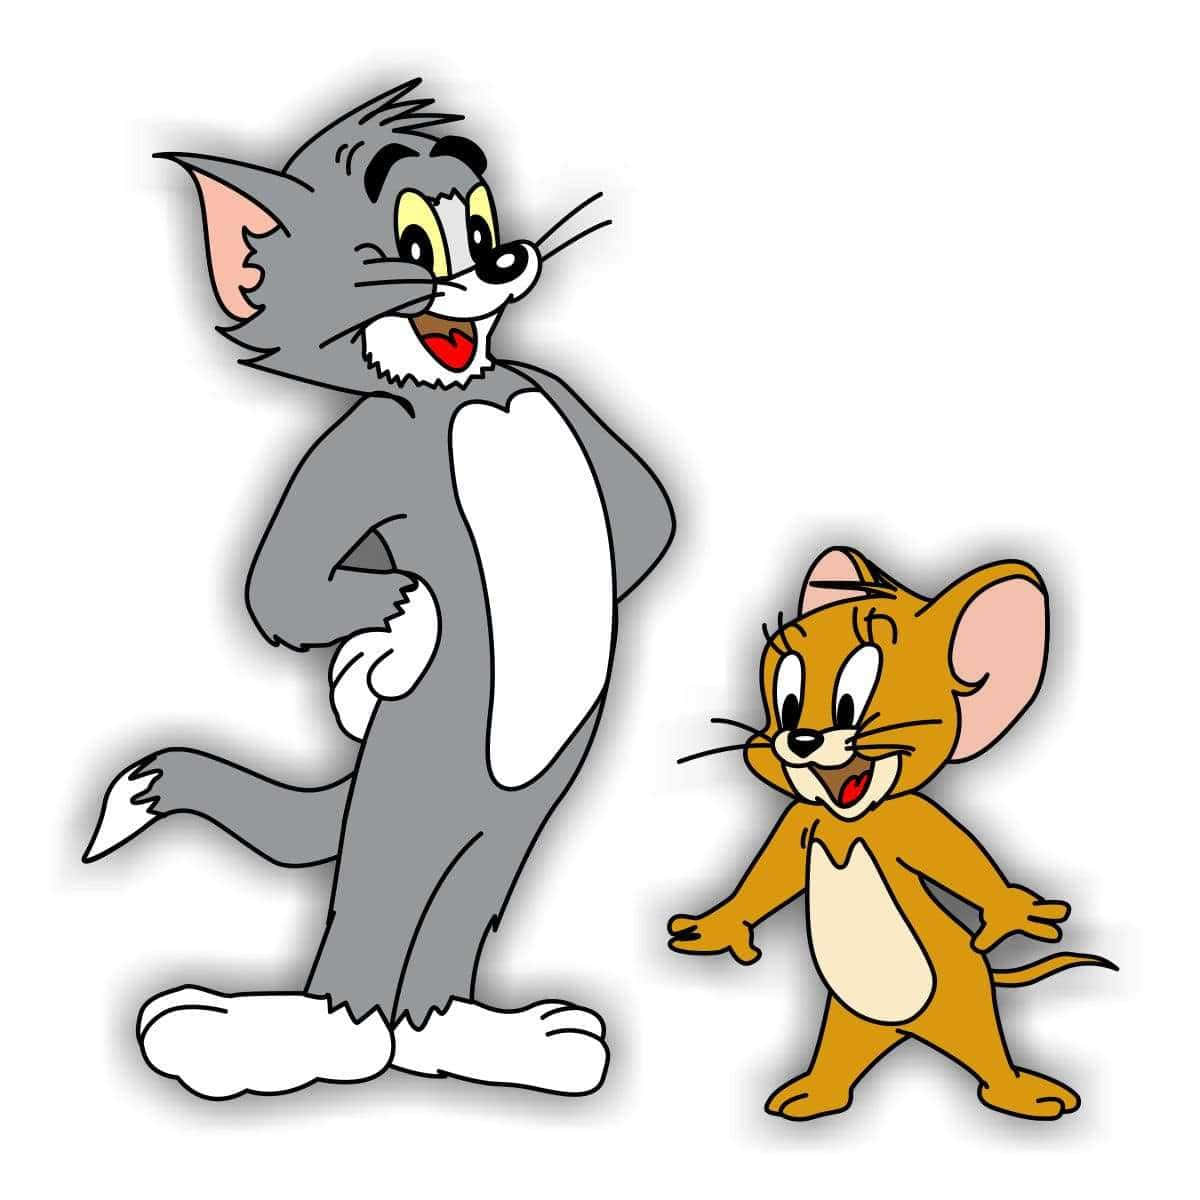 Tom and Jerry having a hilarious time chasing each other.